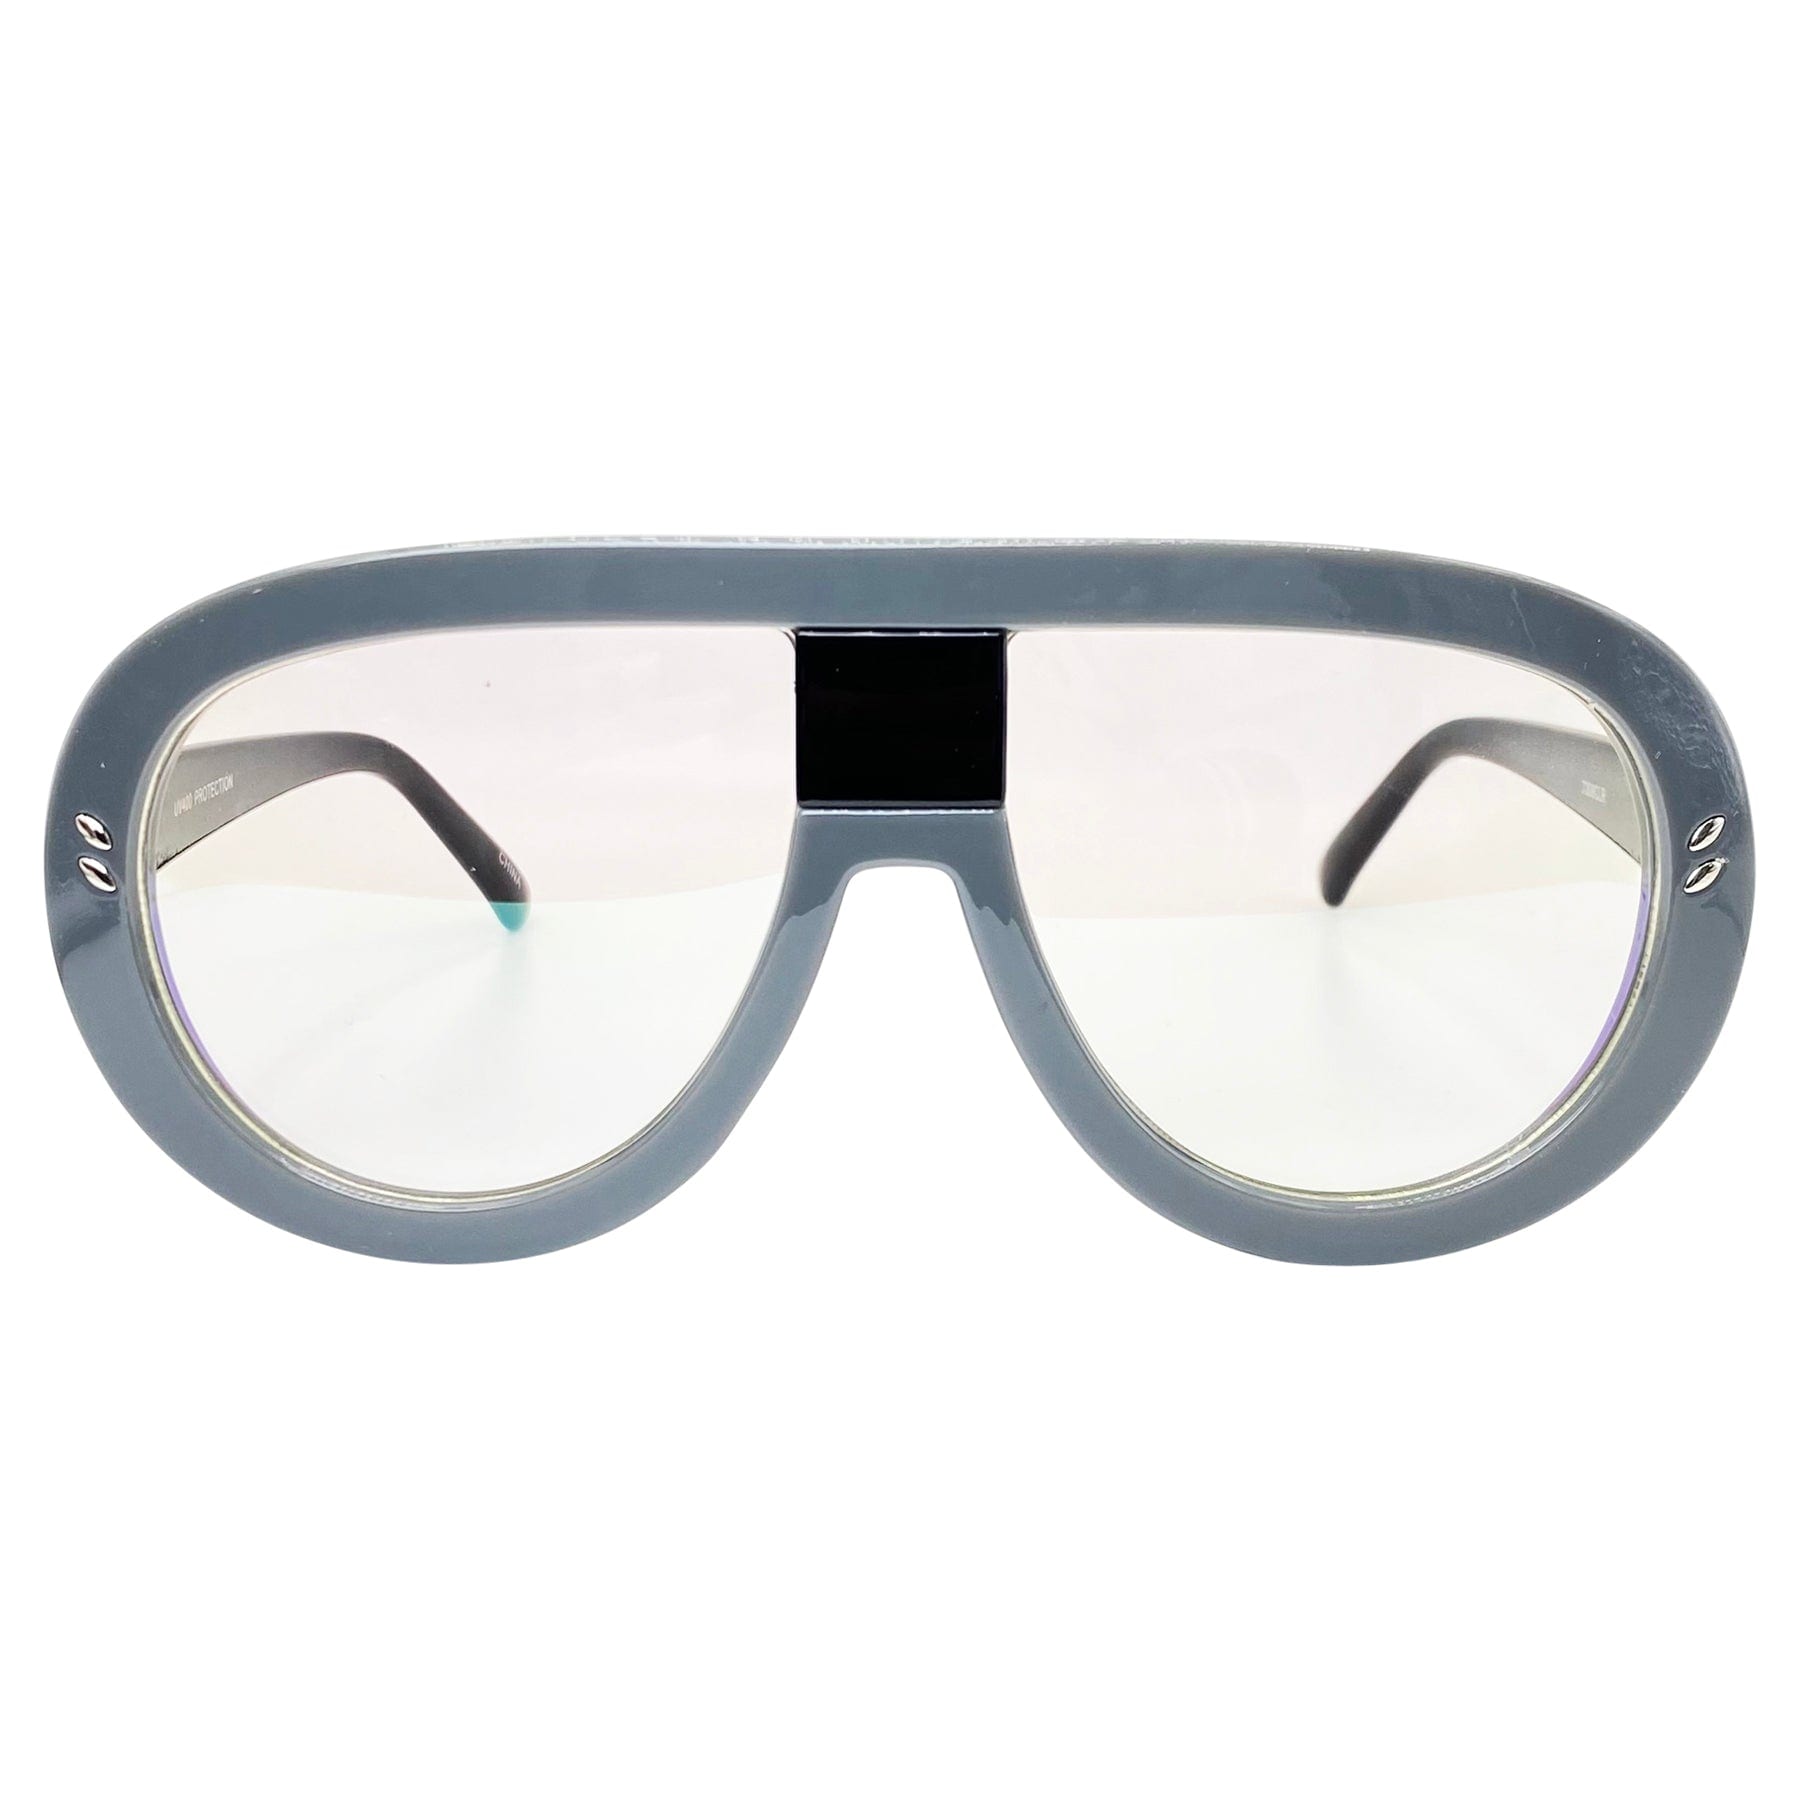 gray colored glasses with a 70s inspired chunky aviator frame and iridescent lenses